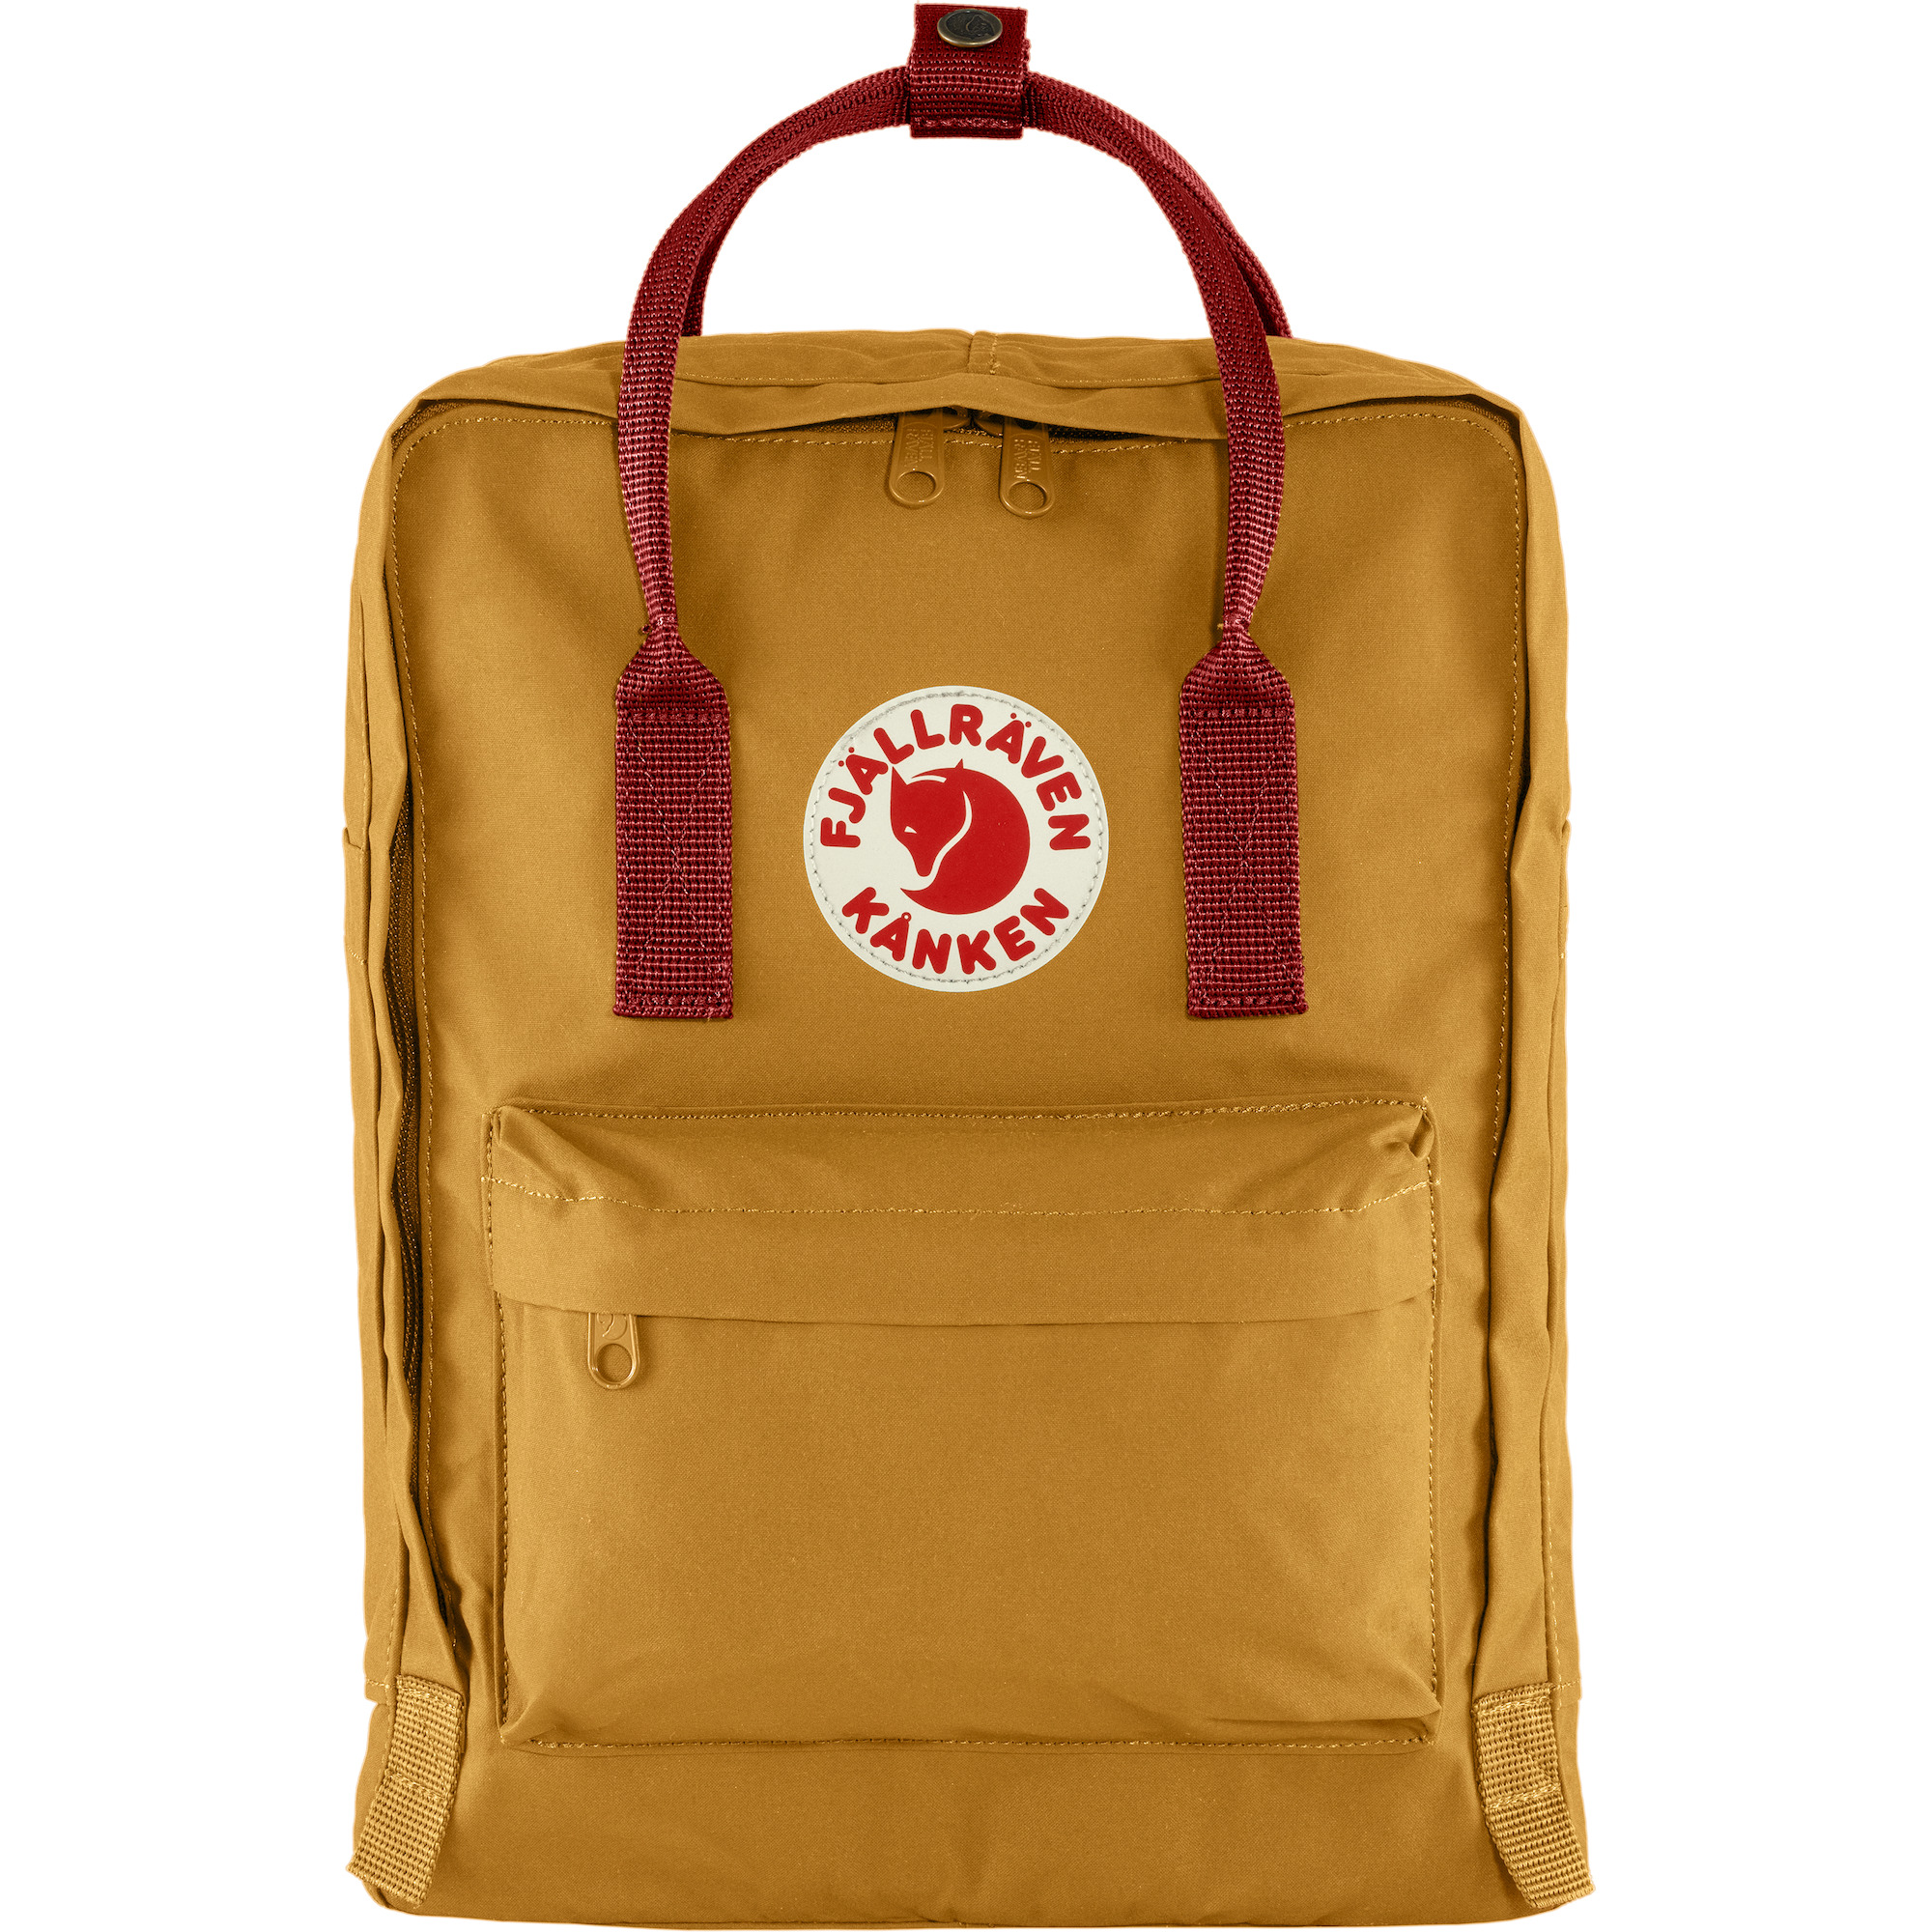 Shop Outdoor Backpacks and Gear | Fjallraven US